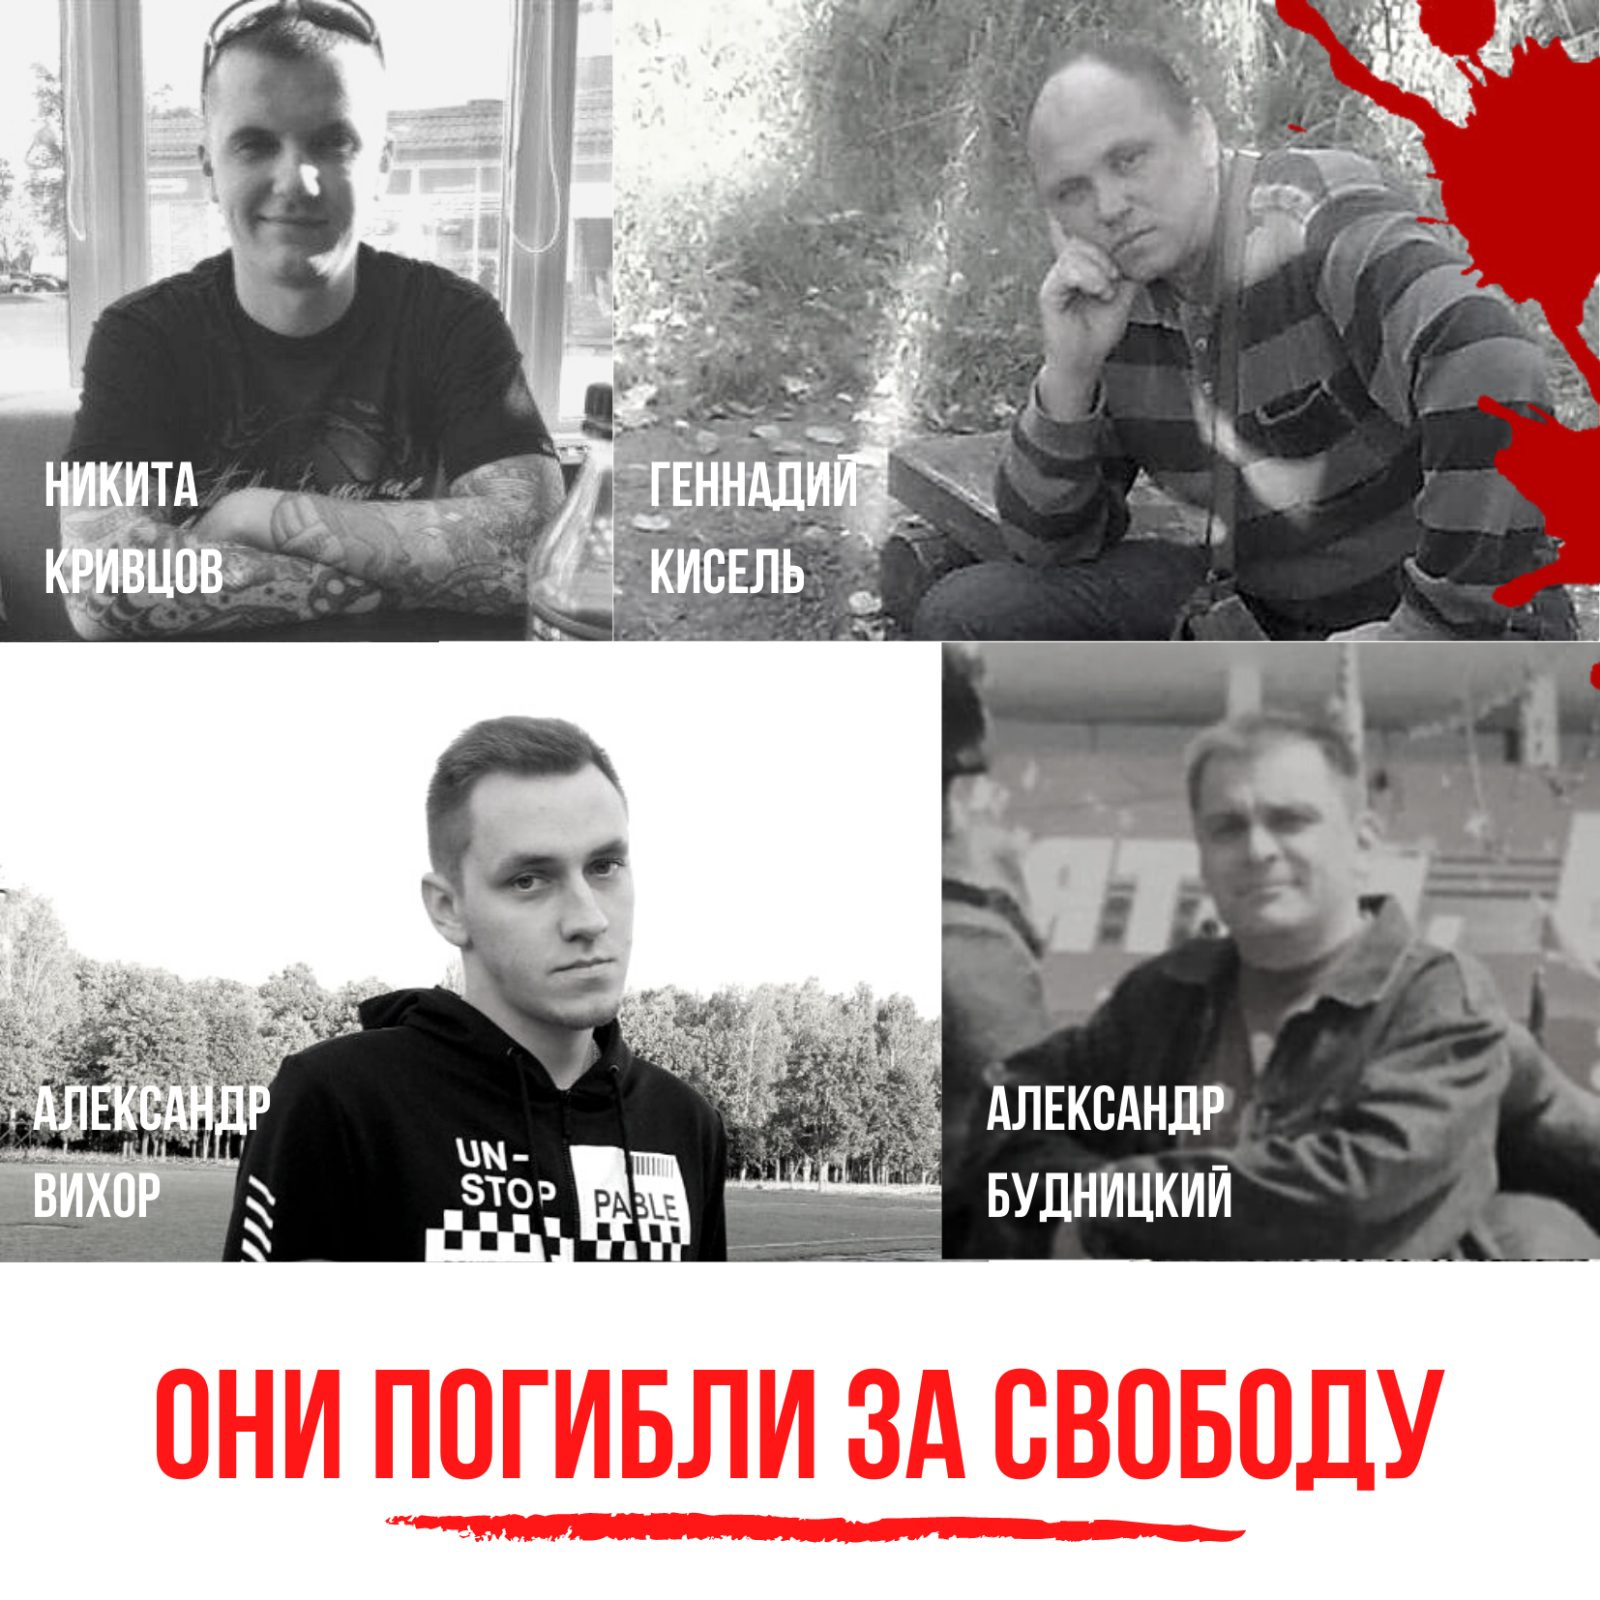 12th of August. 4 victims of the Lukashenka regime